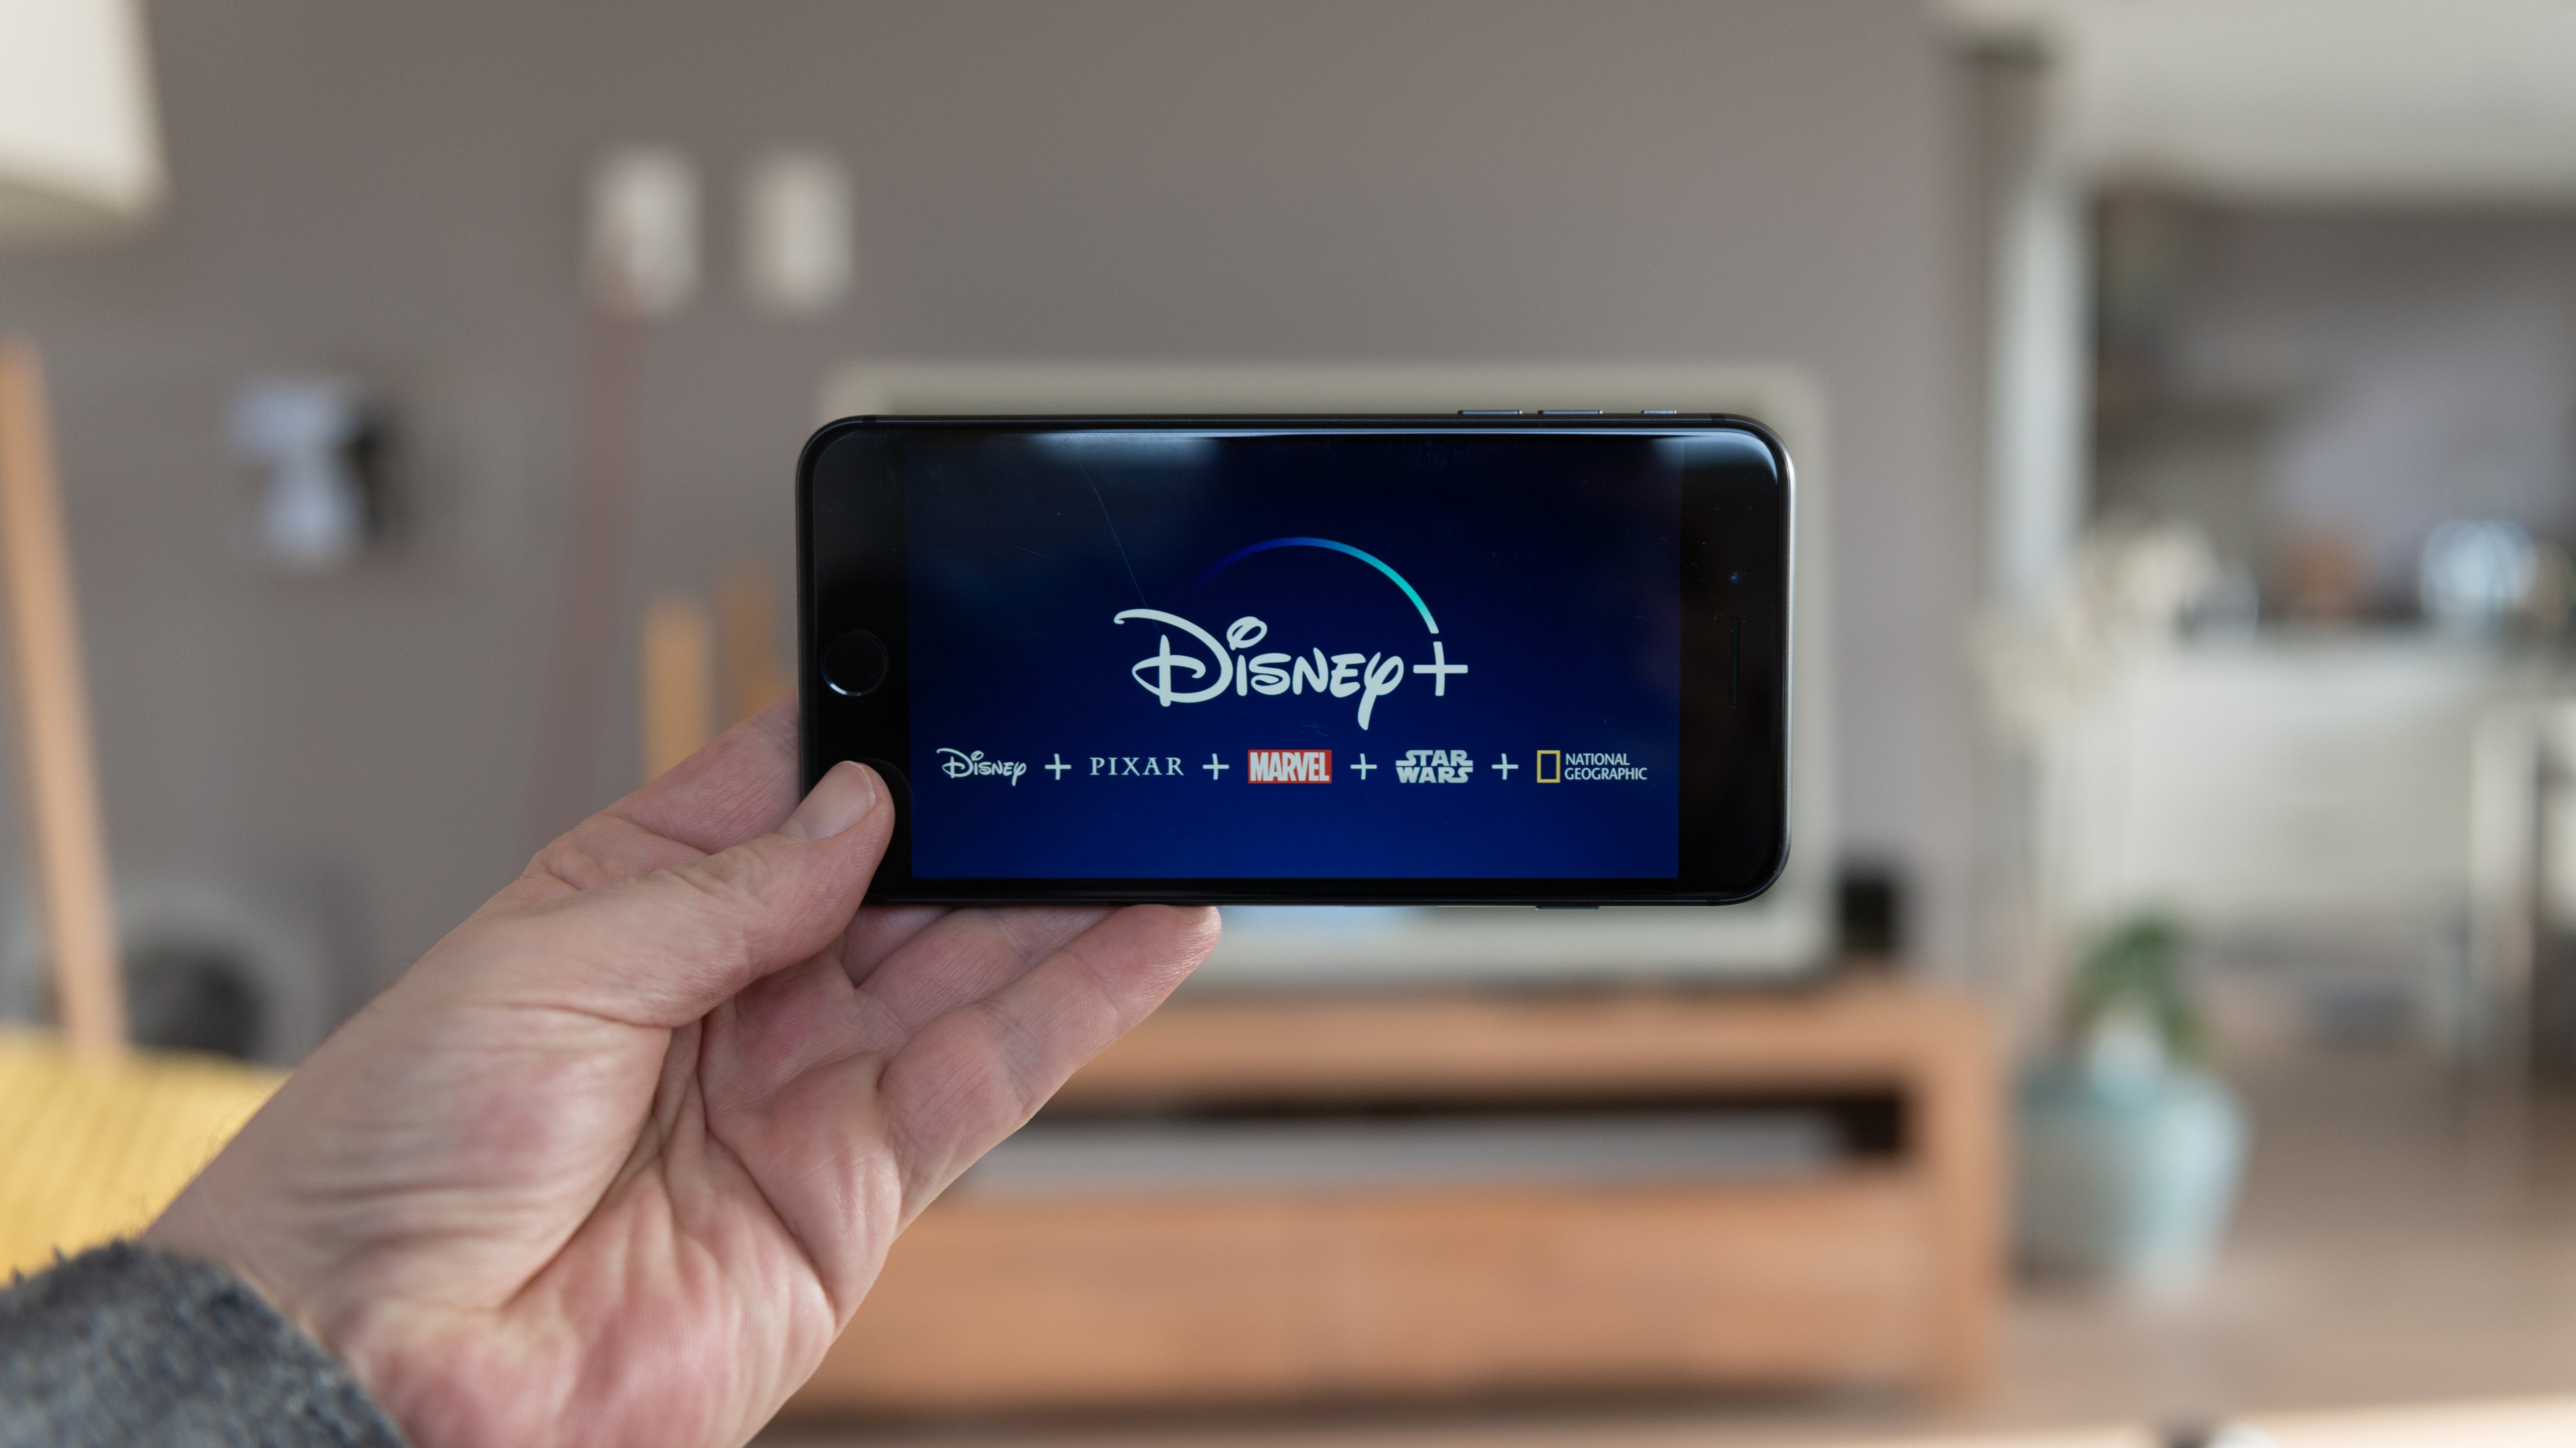 Disney+ startscreen on  mobile phone. Disney+ online video, content streaming subscription service. Man holds his smartphone up and looks at disney plus